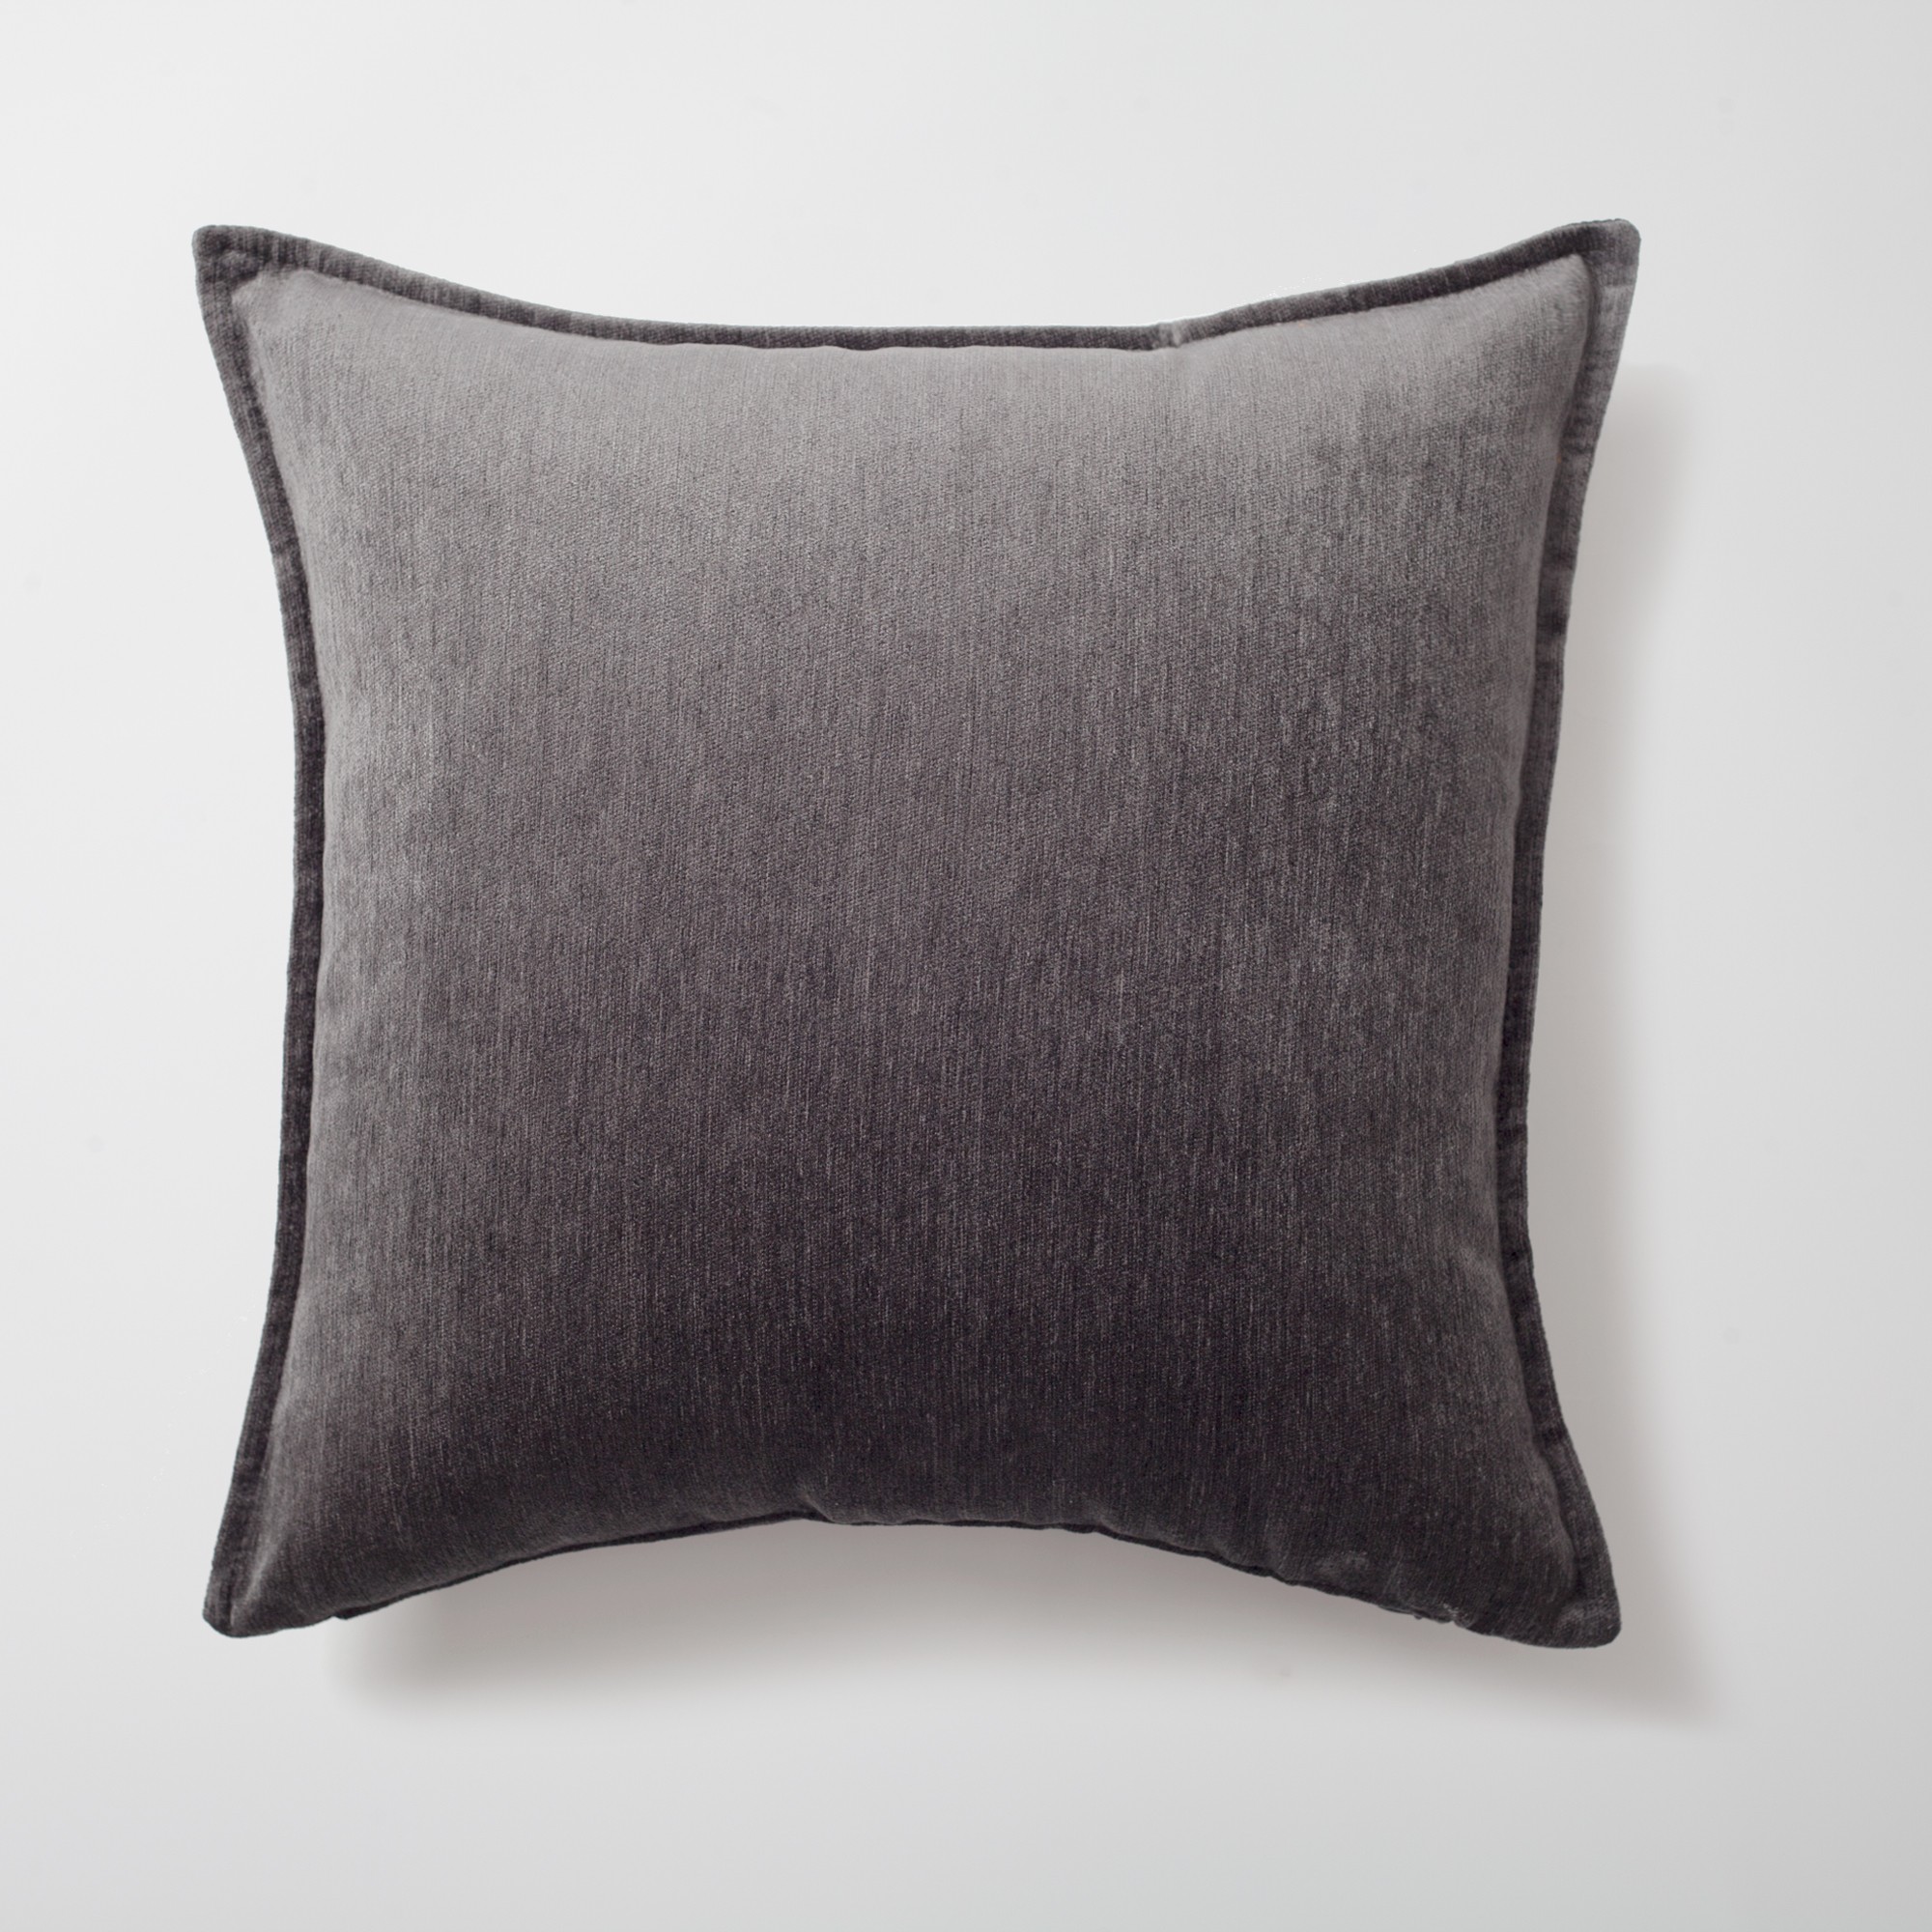 "Eliza" - Viscose Natural Linen Pillow 20x20 Inch - Anthracite (Cover Only)